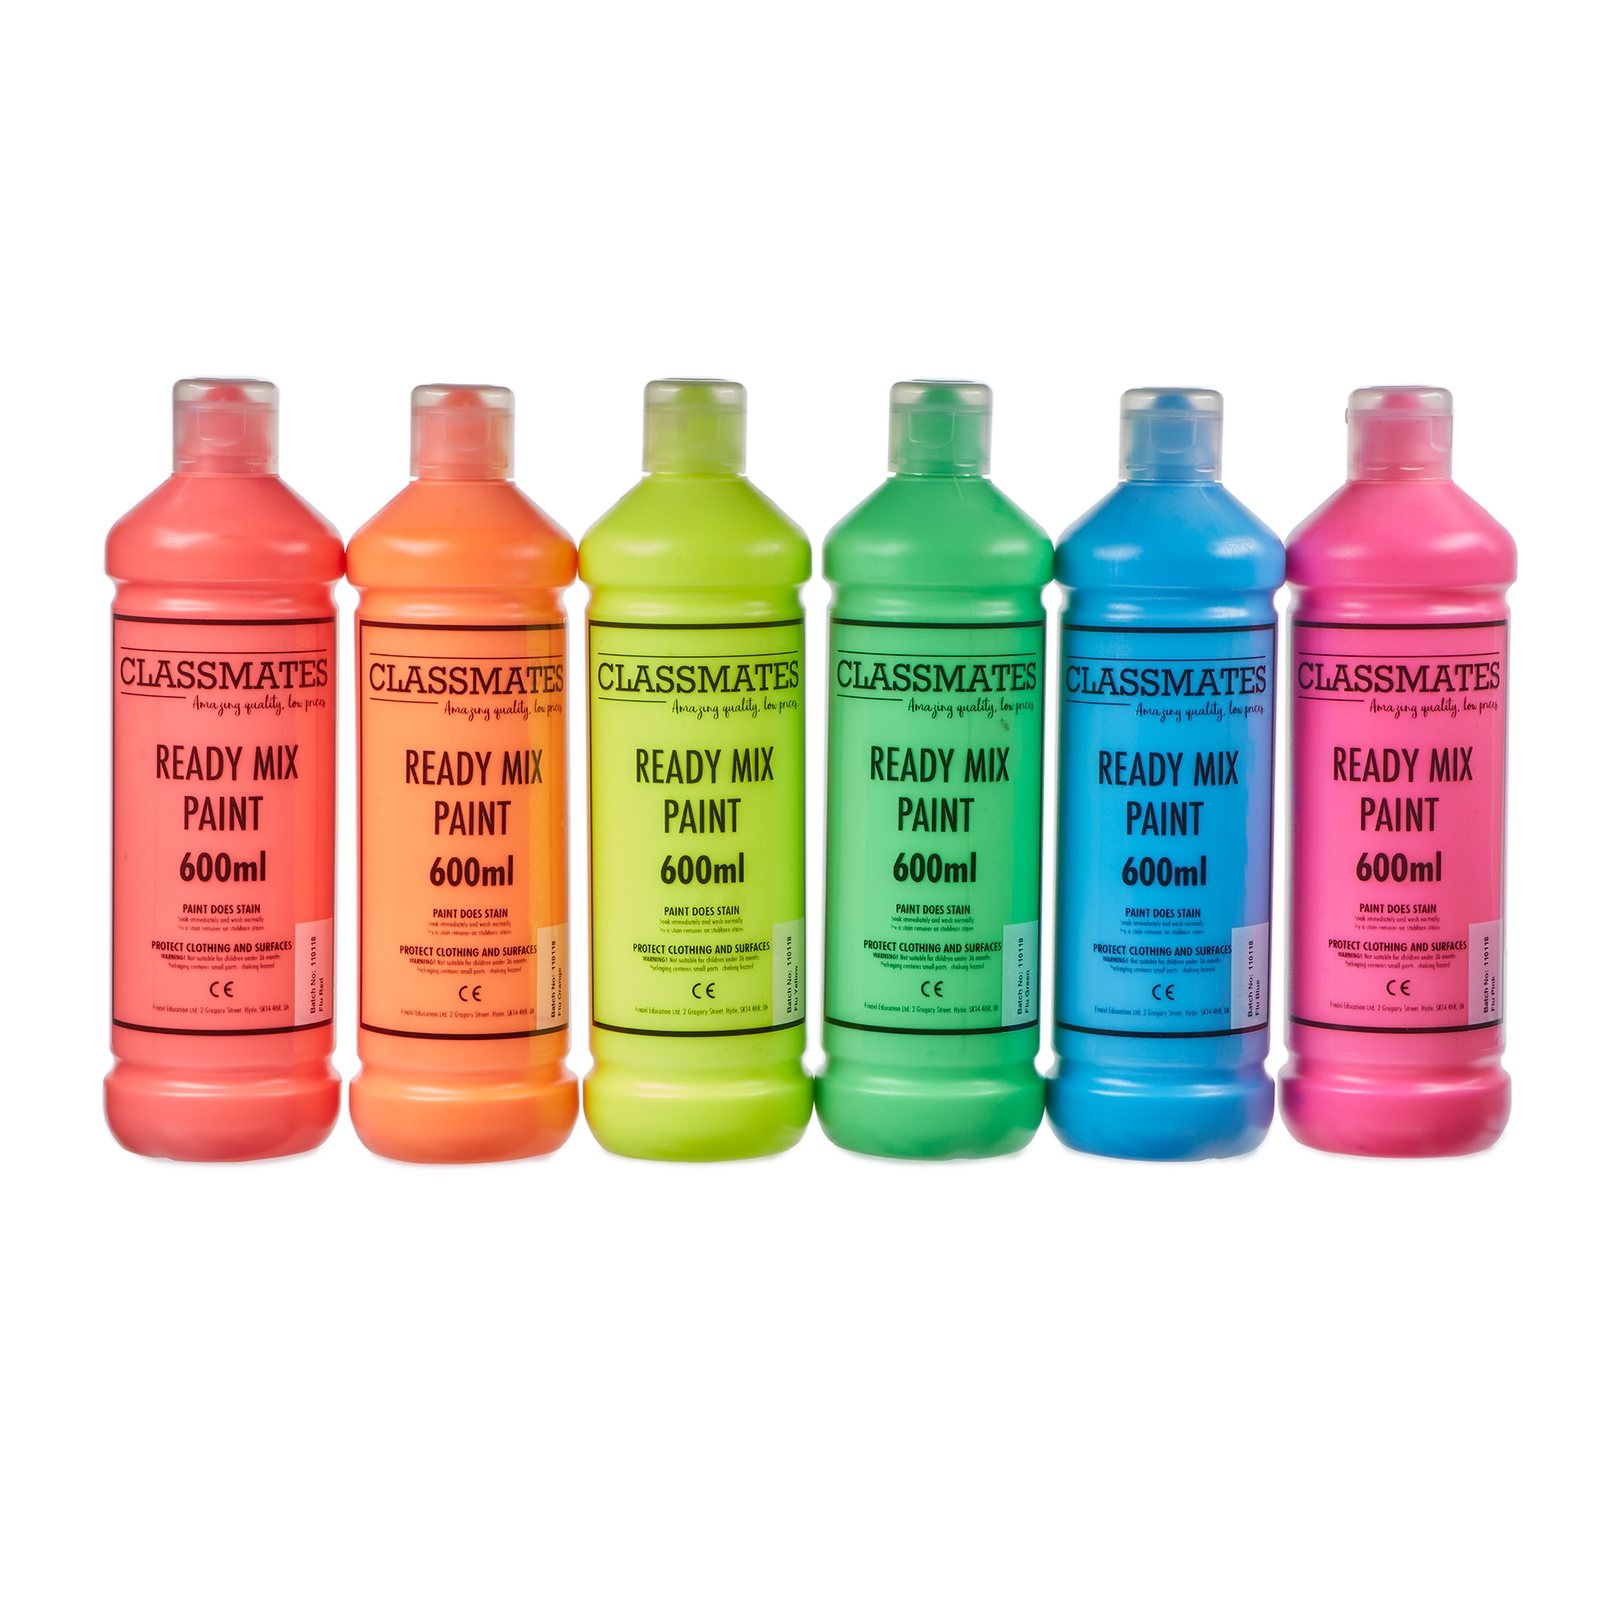 Classmates Fluorescent Ready Mixed Paint - 600ml - Assorted - Pack of 6